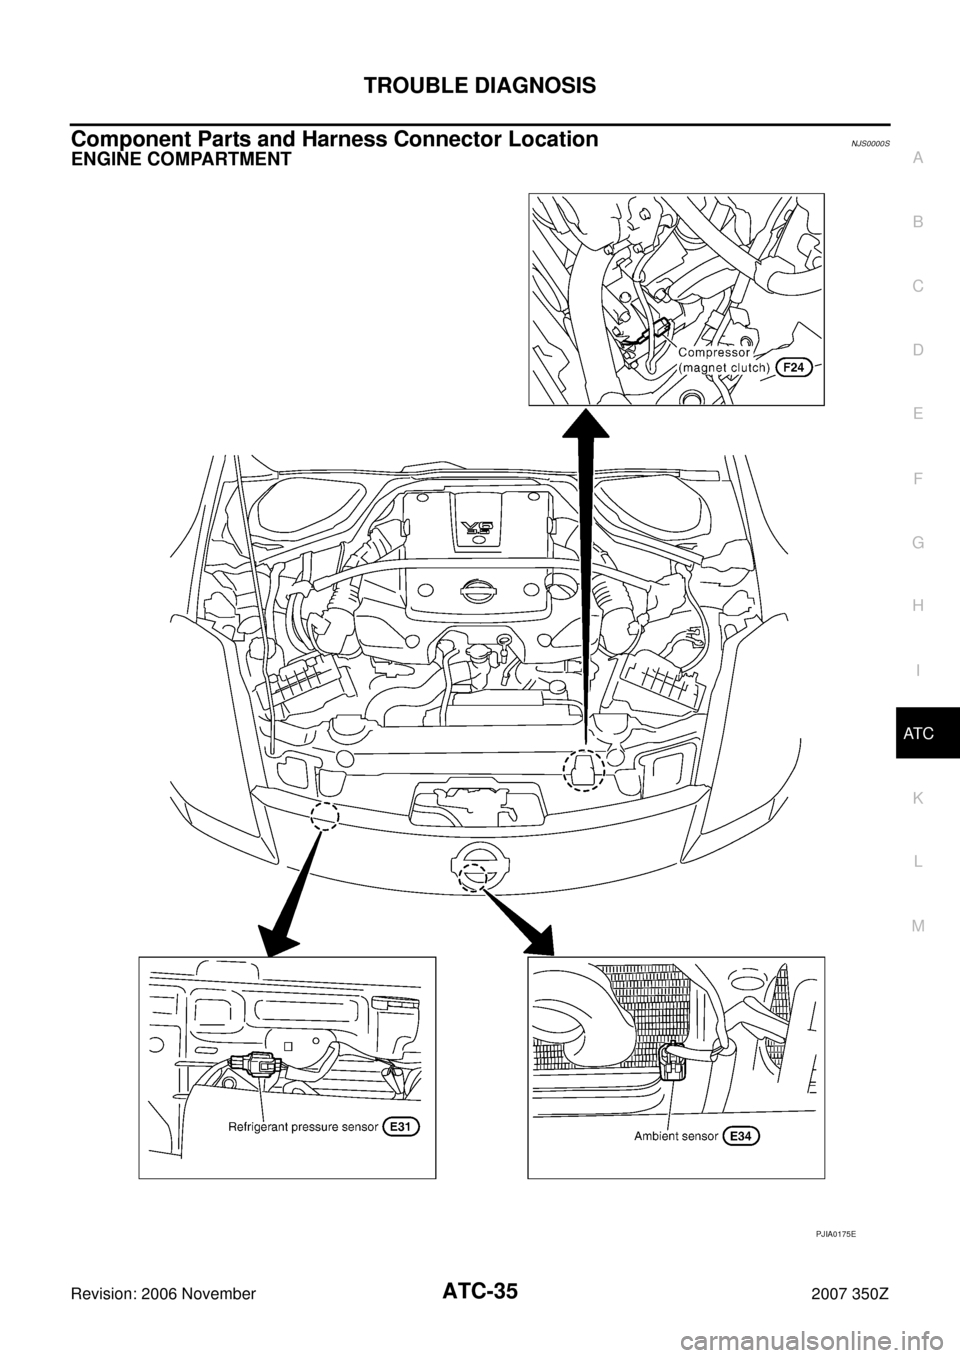 NISSAN 350Z 2007 Z33 Automatic Air Conditioner Owners Guide TROUBLE DIAGNOSIS
ATC-35
C
D
E
F
G
H
I
K
L
MA
B
AT C
Revision: 2006 November2007 350Z
Component Parts and Harness Connector LocationNJS0000S
ENGINE COMPARTMENT
PJIA0175E 